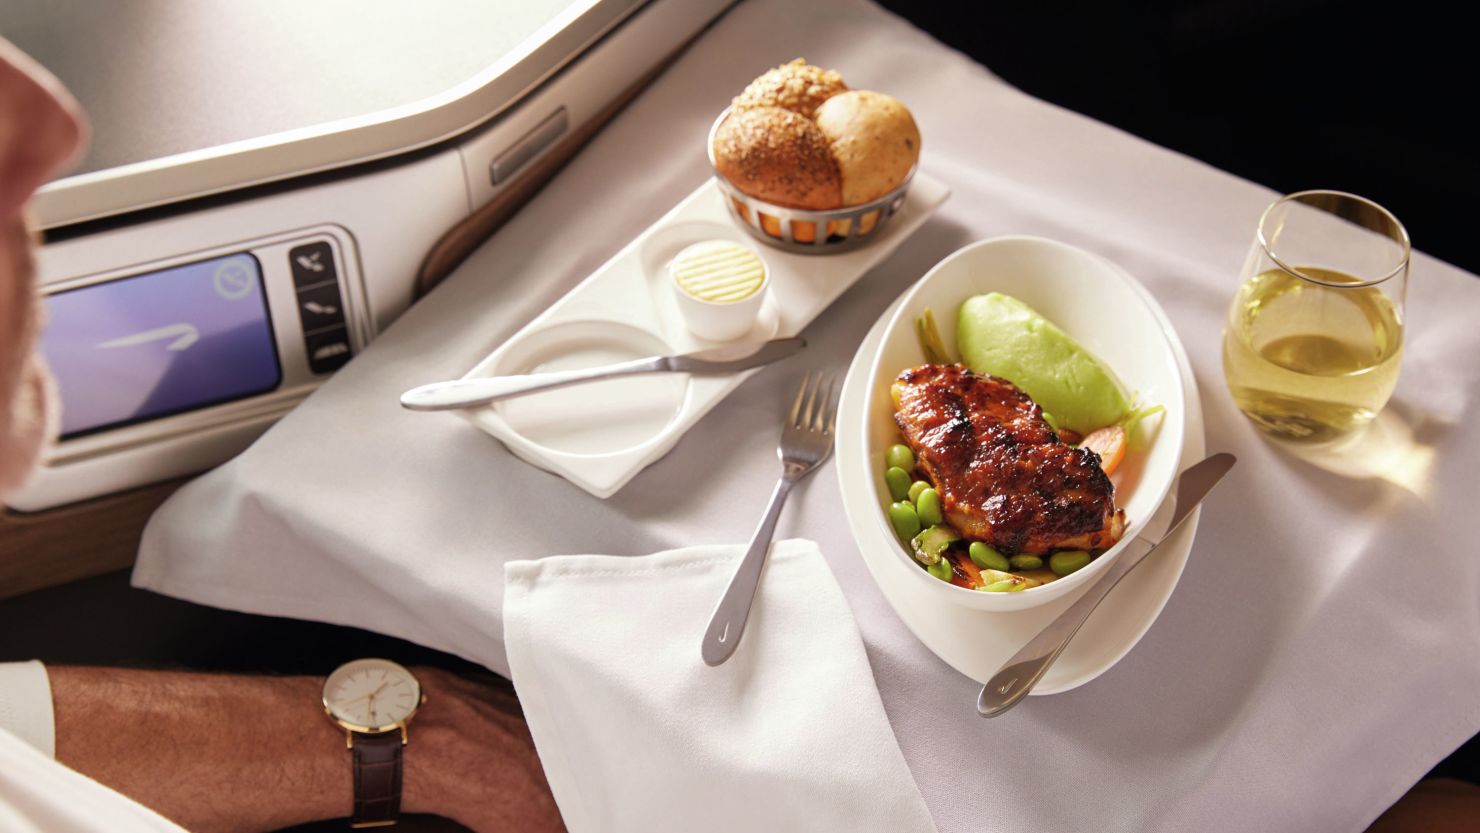 British Airways is offering inflight dining and other items for sale.